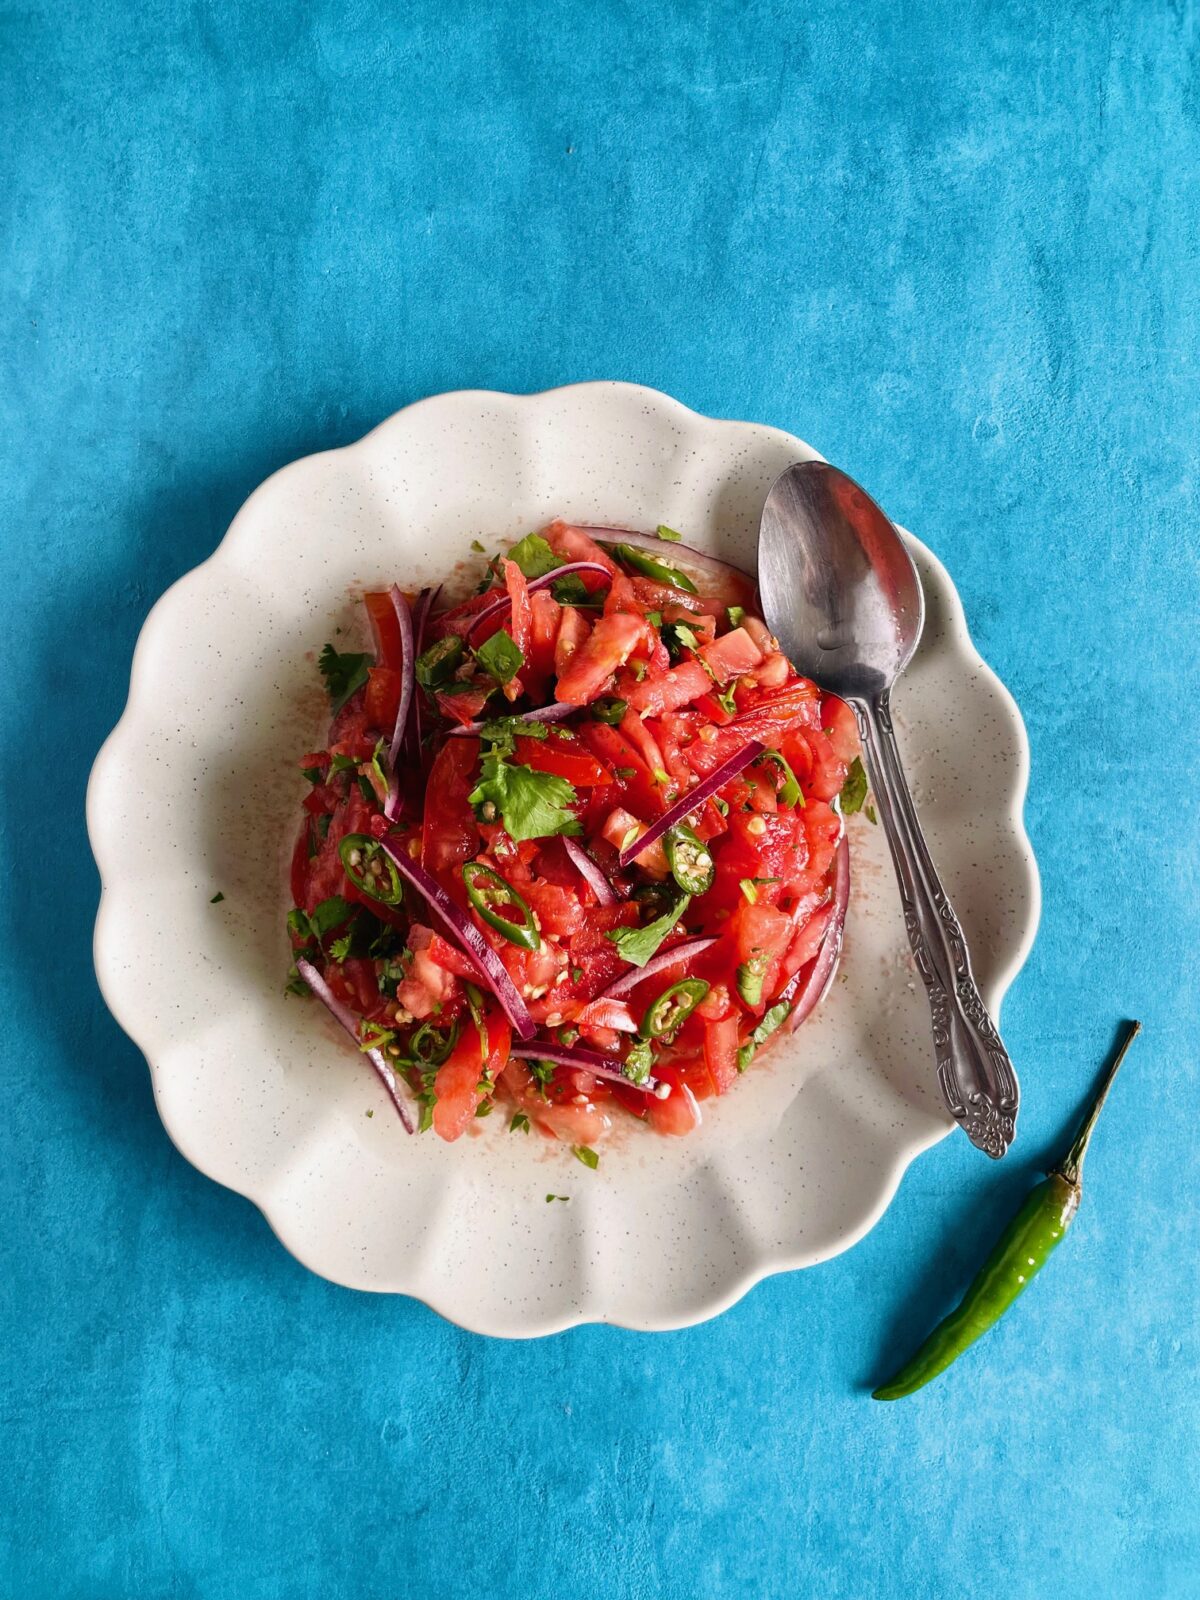 Satini pomme d'amour avec piment. Sliced tomatoes, chopped green chilies, sliced red onion in a plate with scalloped edges. Spoon on the edge of the plate.